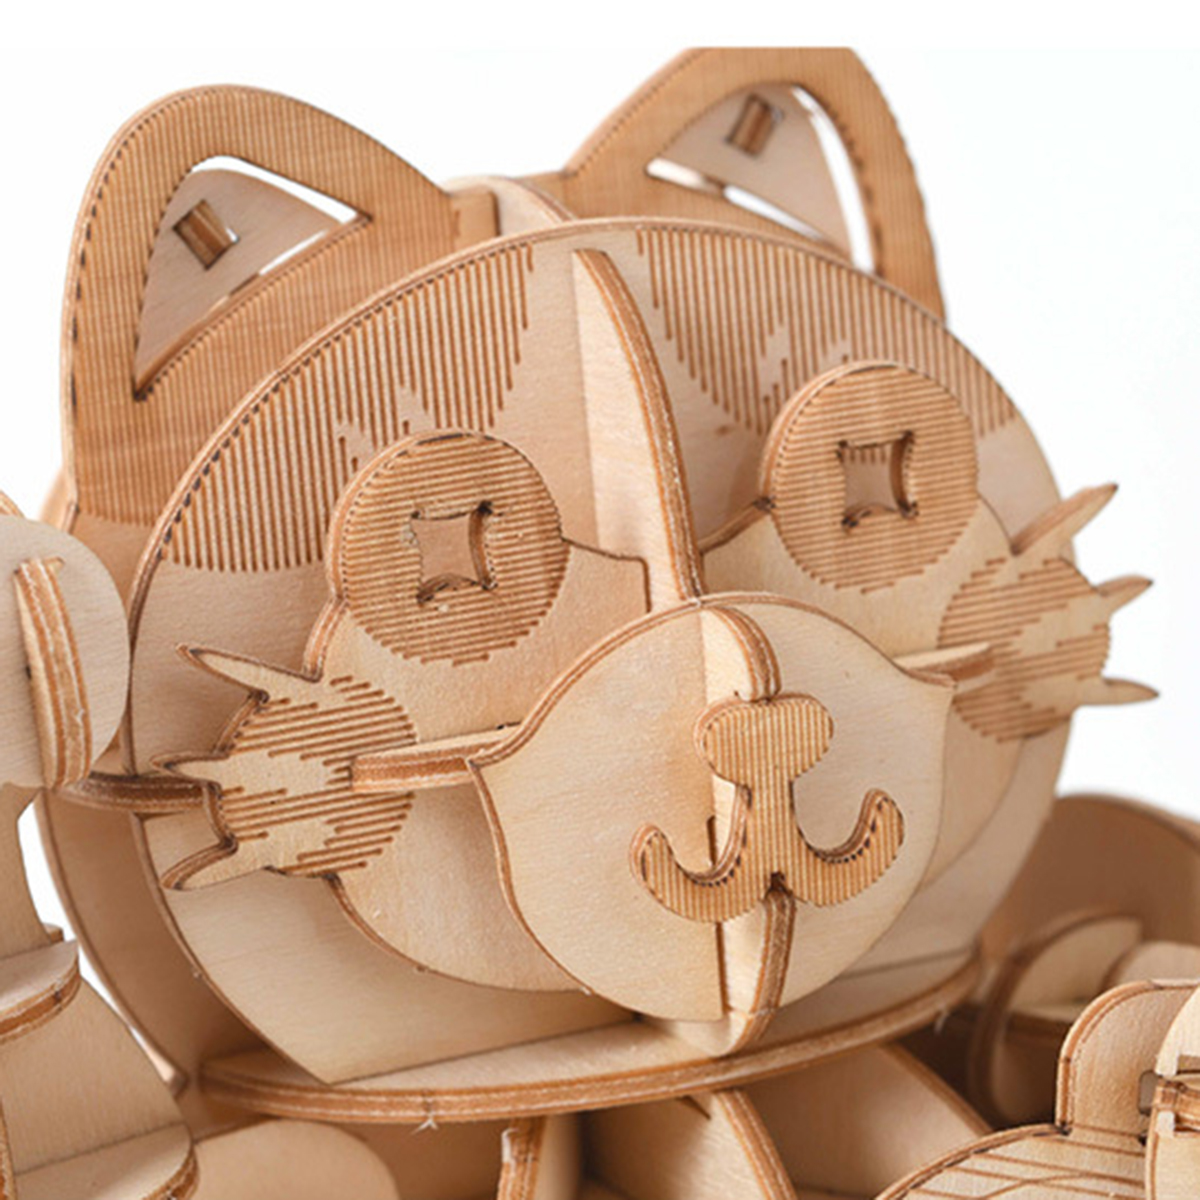 3D-Wooden-Puzzle-Assembly-Model-DIY-Animal-Cat-Wood-Craft-Kids-Educational-Toys-Gift-1647393-7